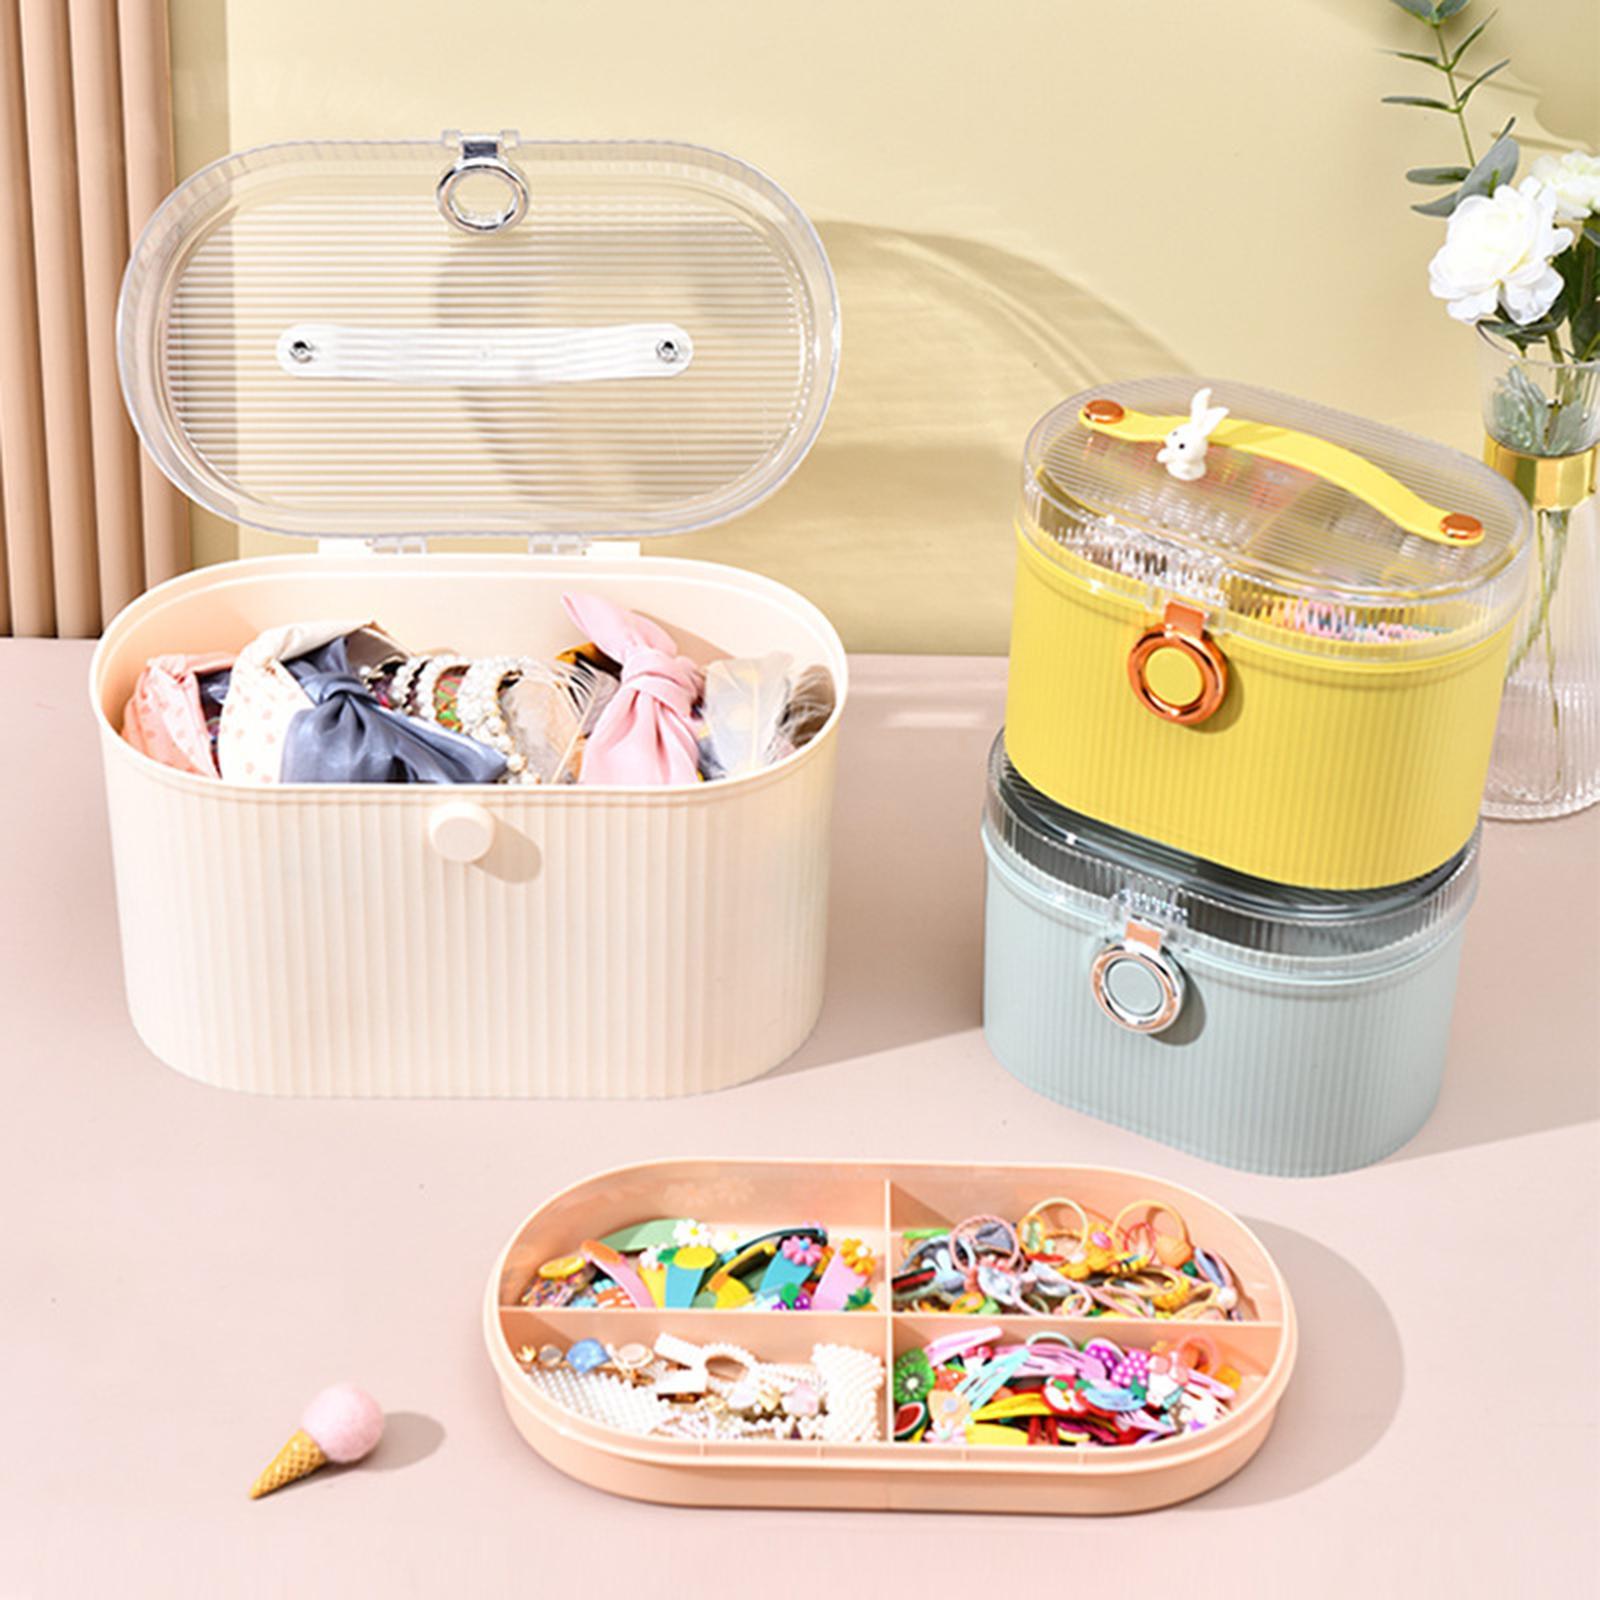 Home Organiser Storage Box Two Compartments for Crafts Hair Accessory Sewing